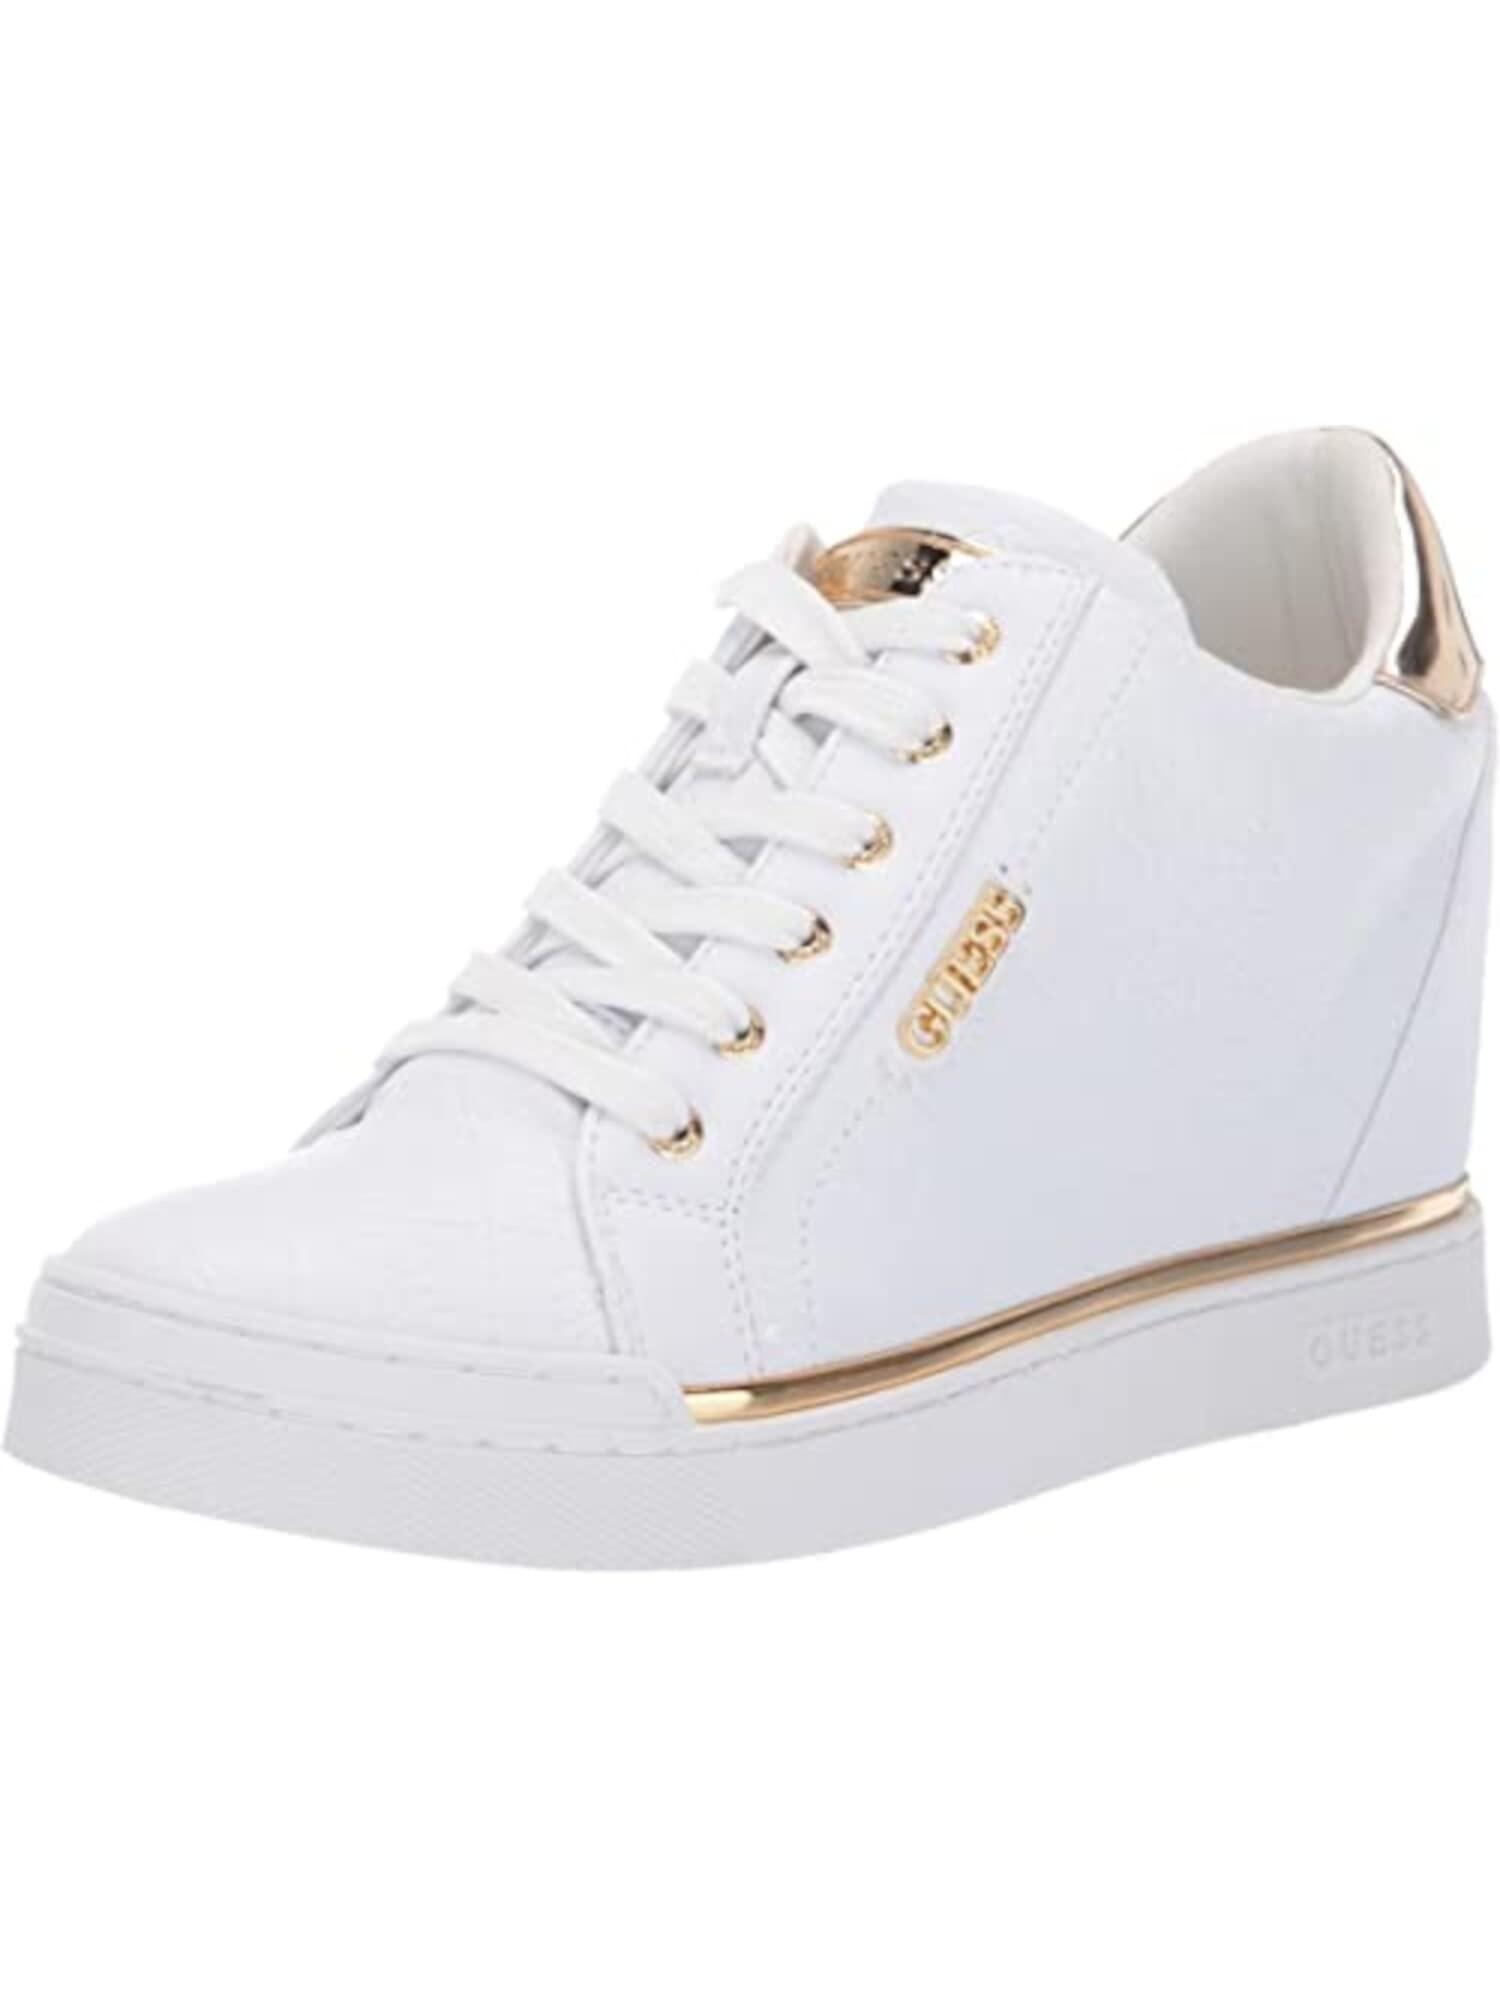 Guess Shoes White Logo Us | Lyst UK